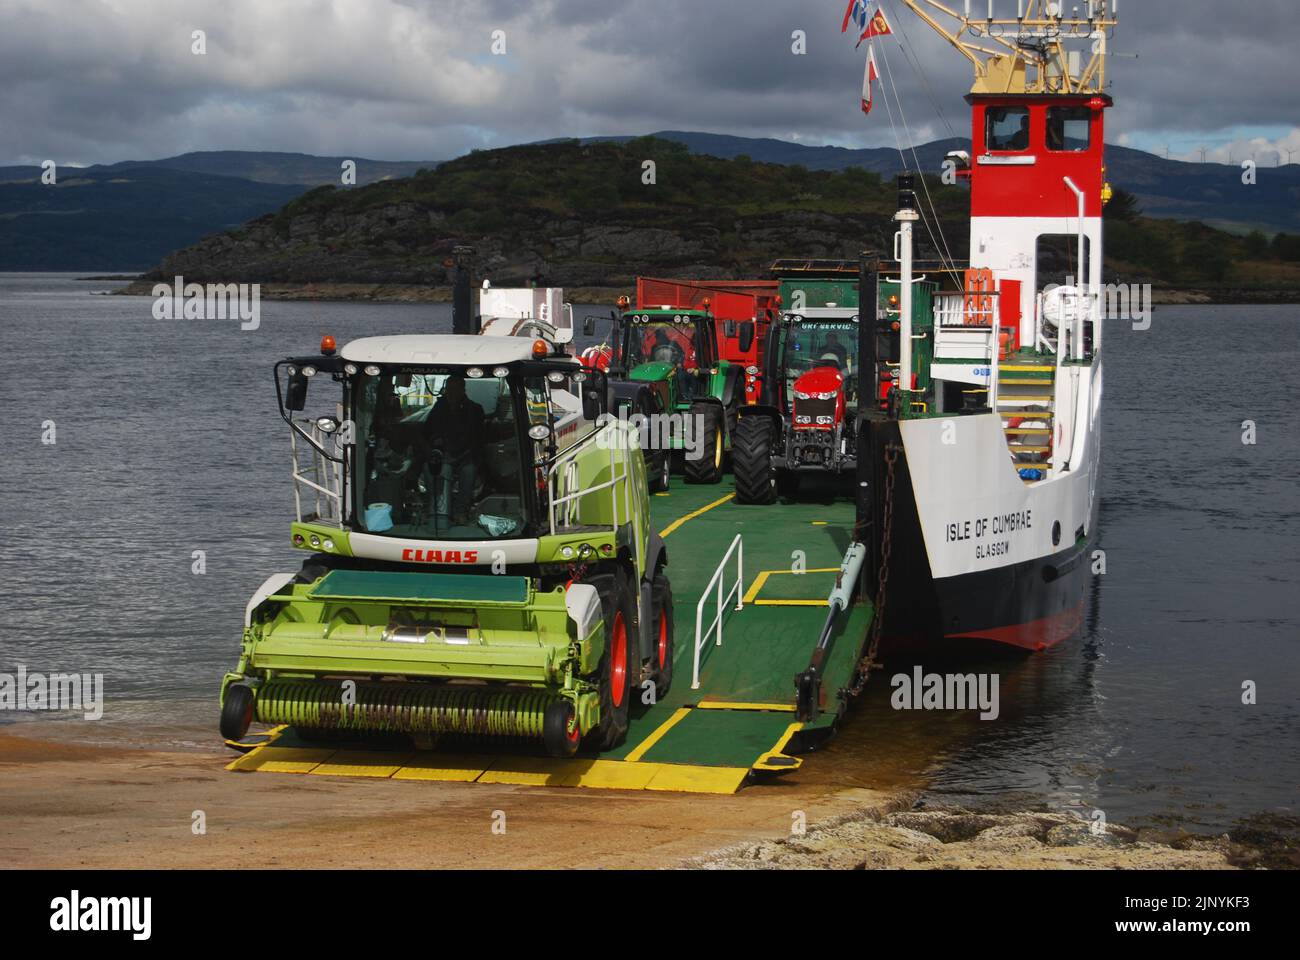 A forage harvester, tractors and trailers disembark the 'MV Isle of Cumbrae'  Tarbert to Portavadie Calmac ferry on Loch Fyne, Argyll, Scotland, UK. Stock Photo